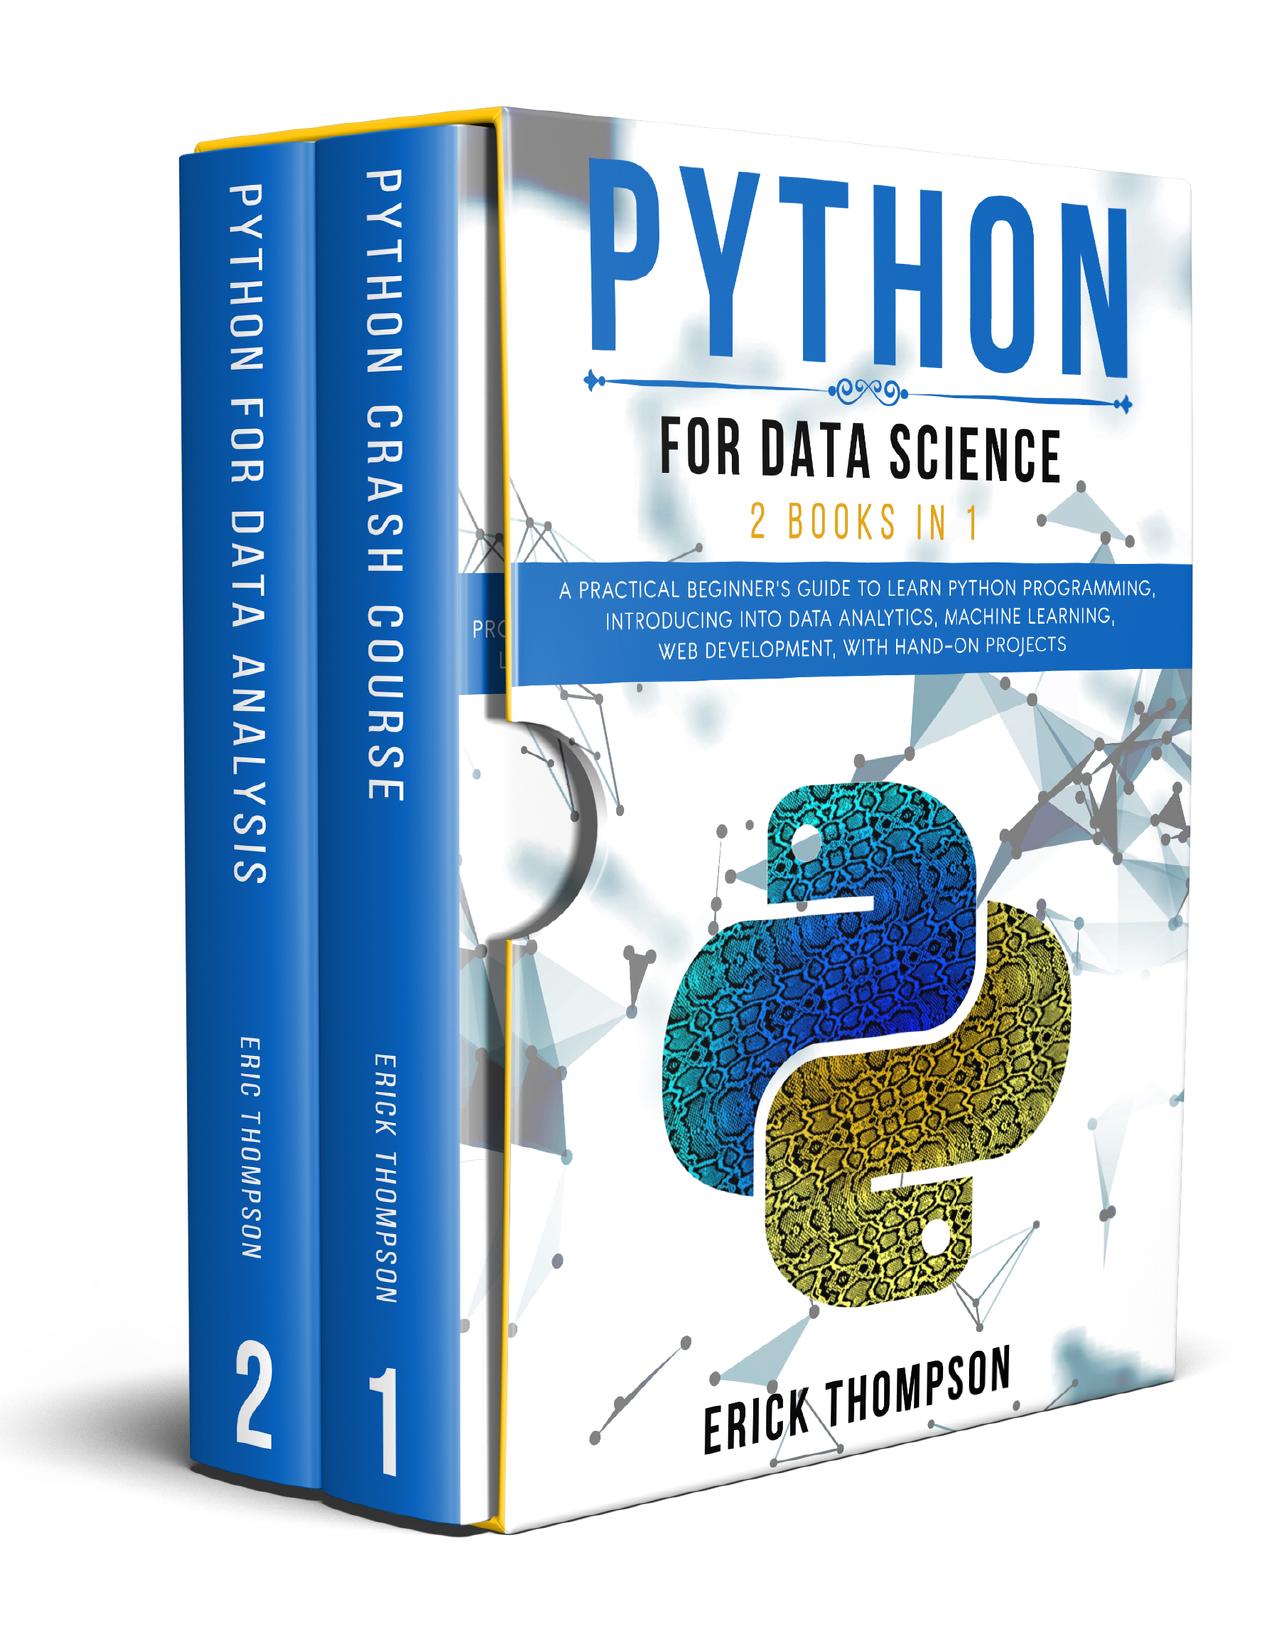 Python for Data Science: 2 Books in 1. A Practical Beginner’s Guide to learn Python Programming, introducing into Data Analytics, Machine Learning, Web Development, with Hands-on Projects